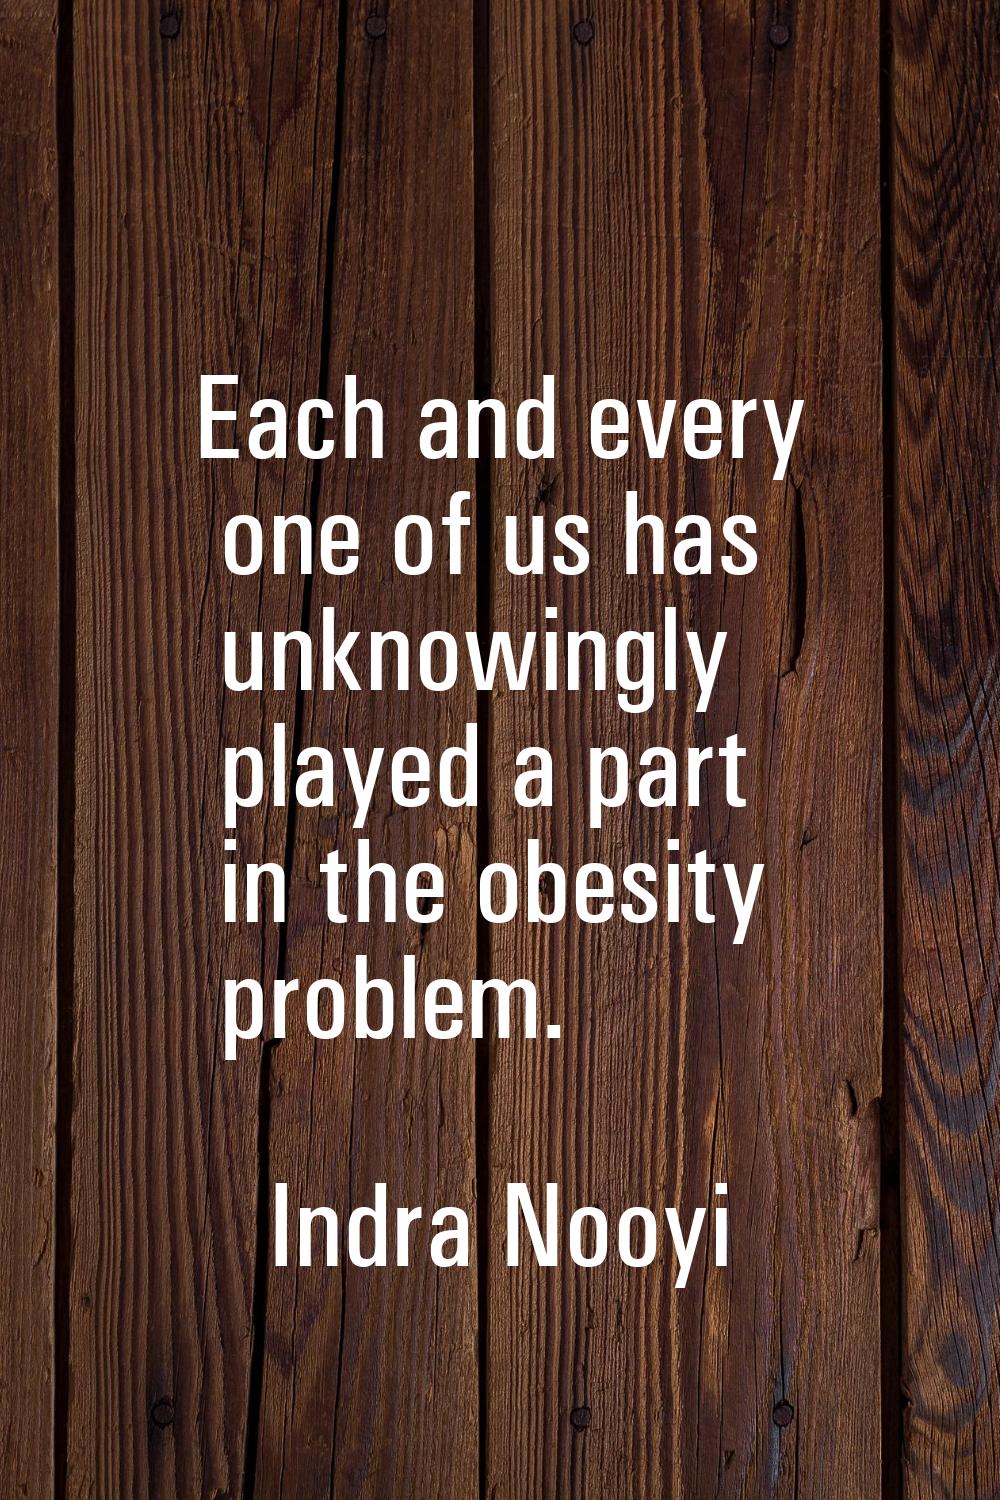 Each and every one of us has unknowingly played a part in the obesity problem.